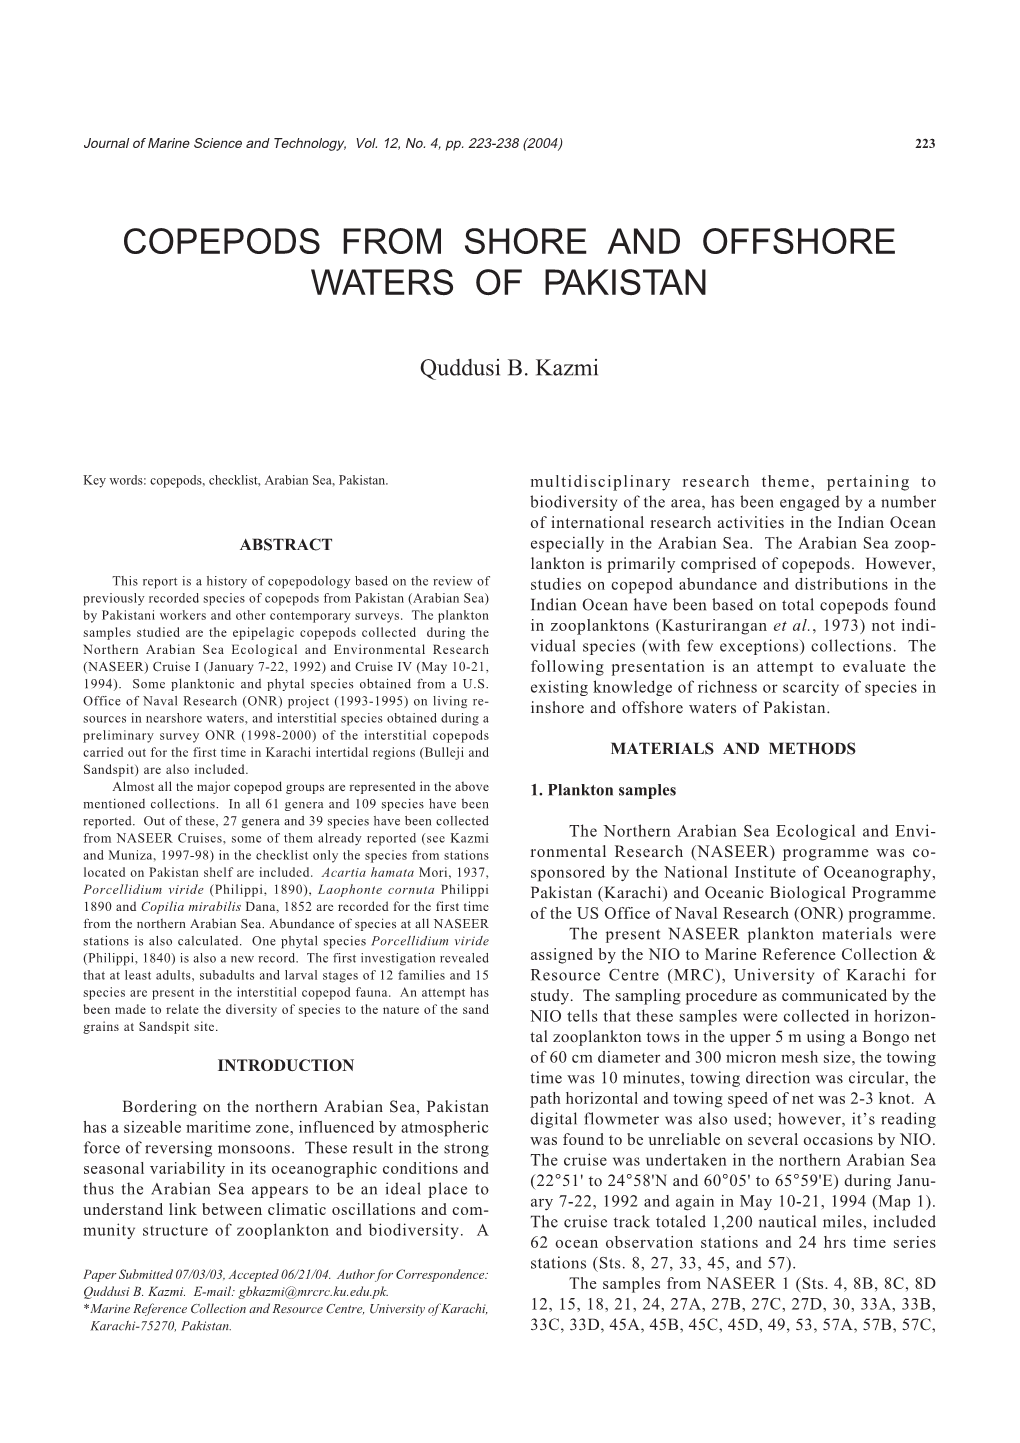 Copepods from Shore and Offshore Waters of Pakistan